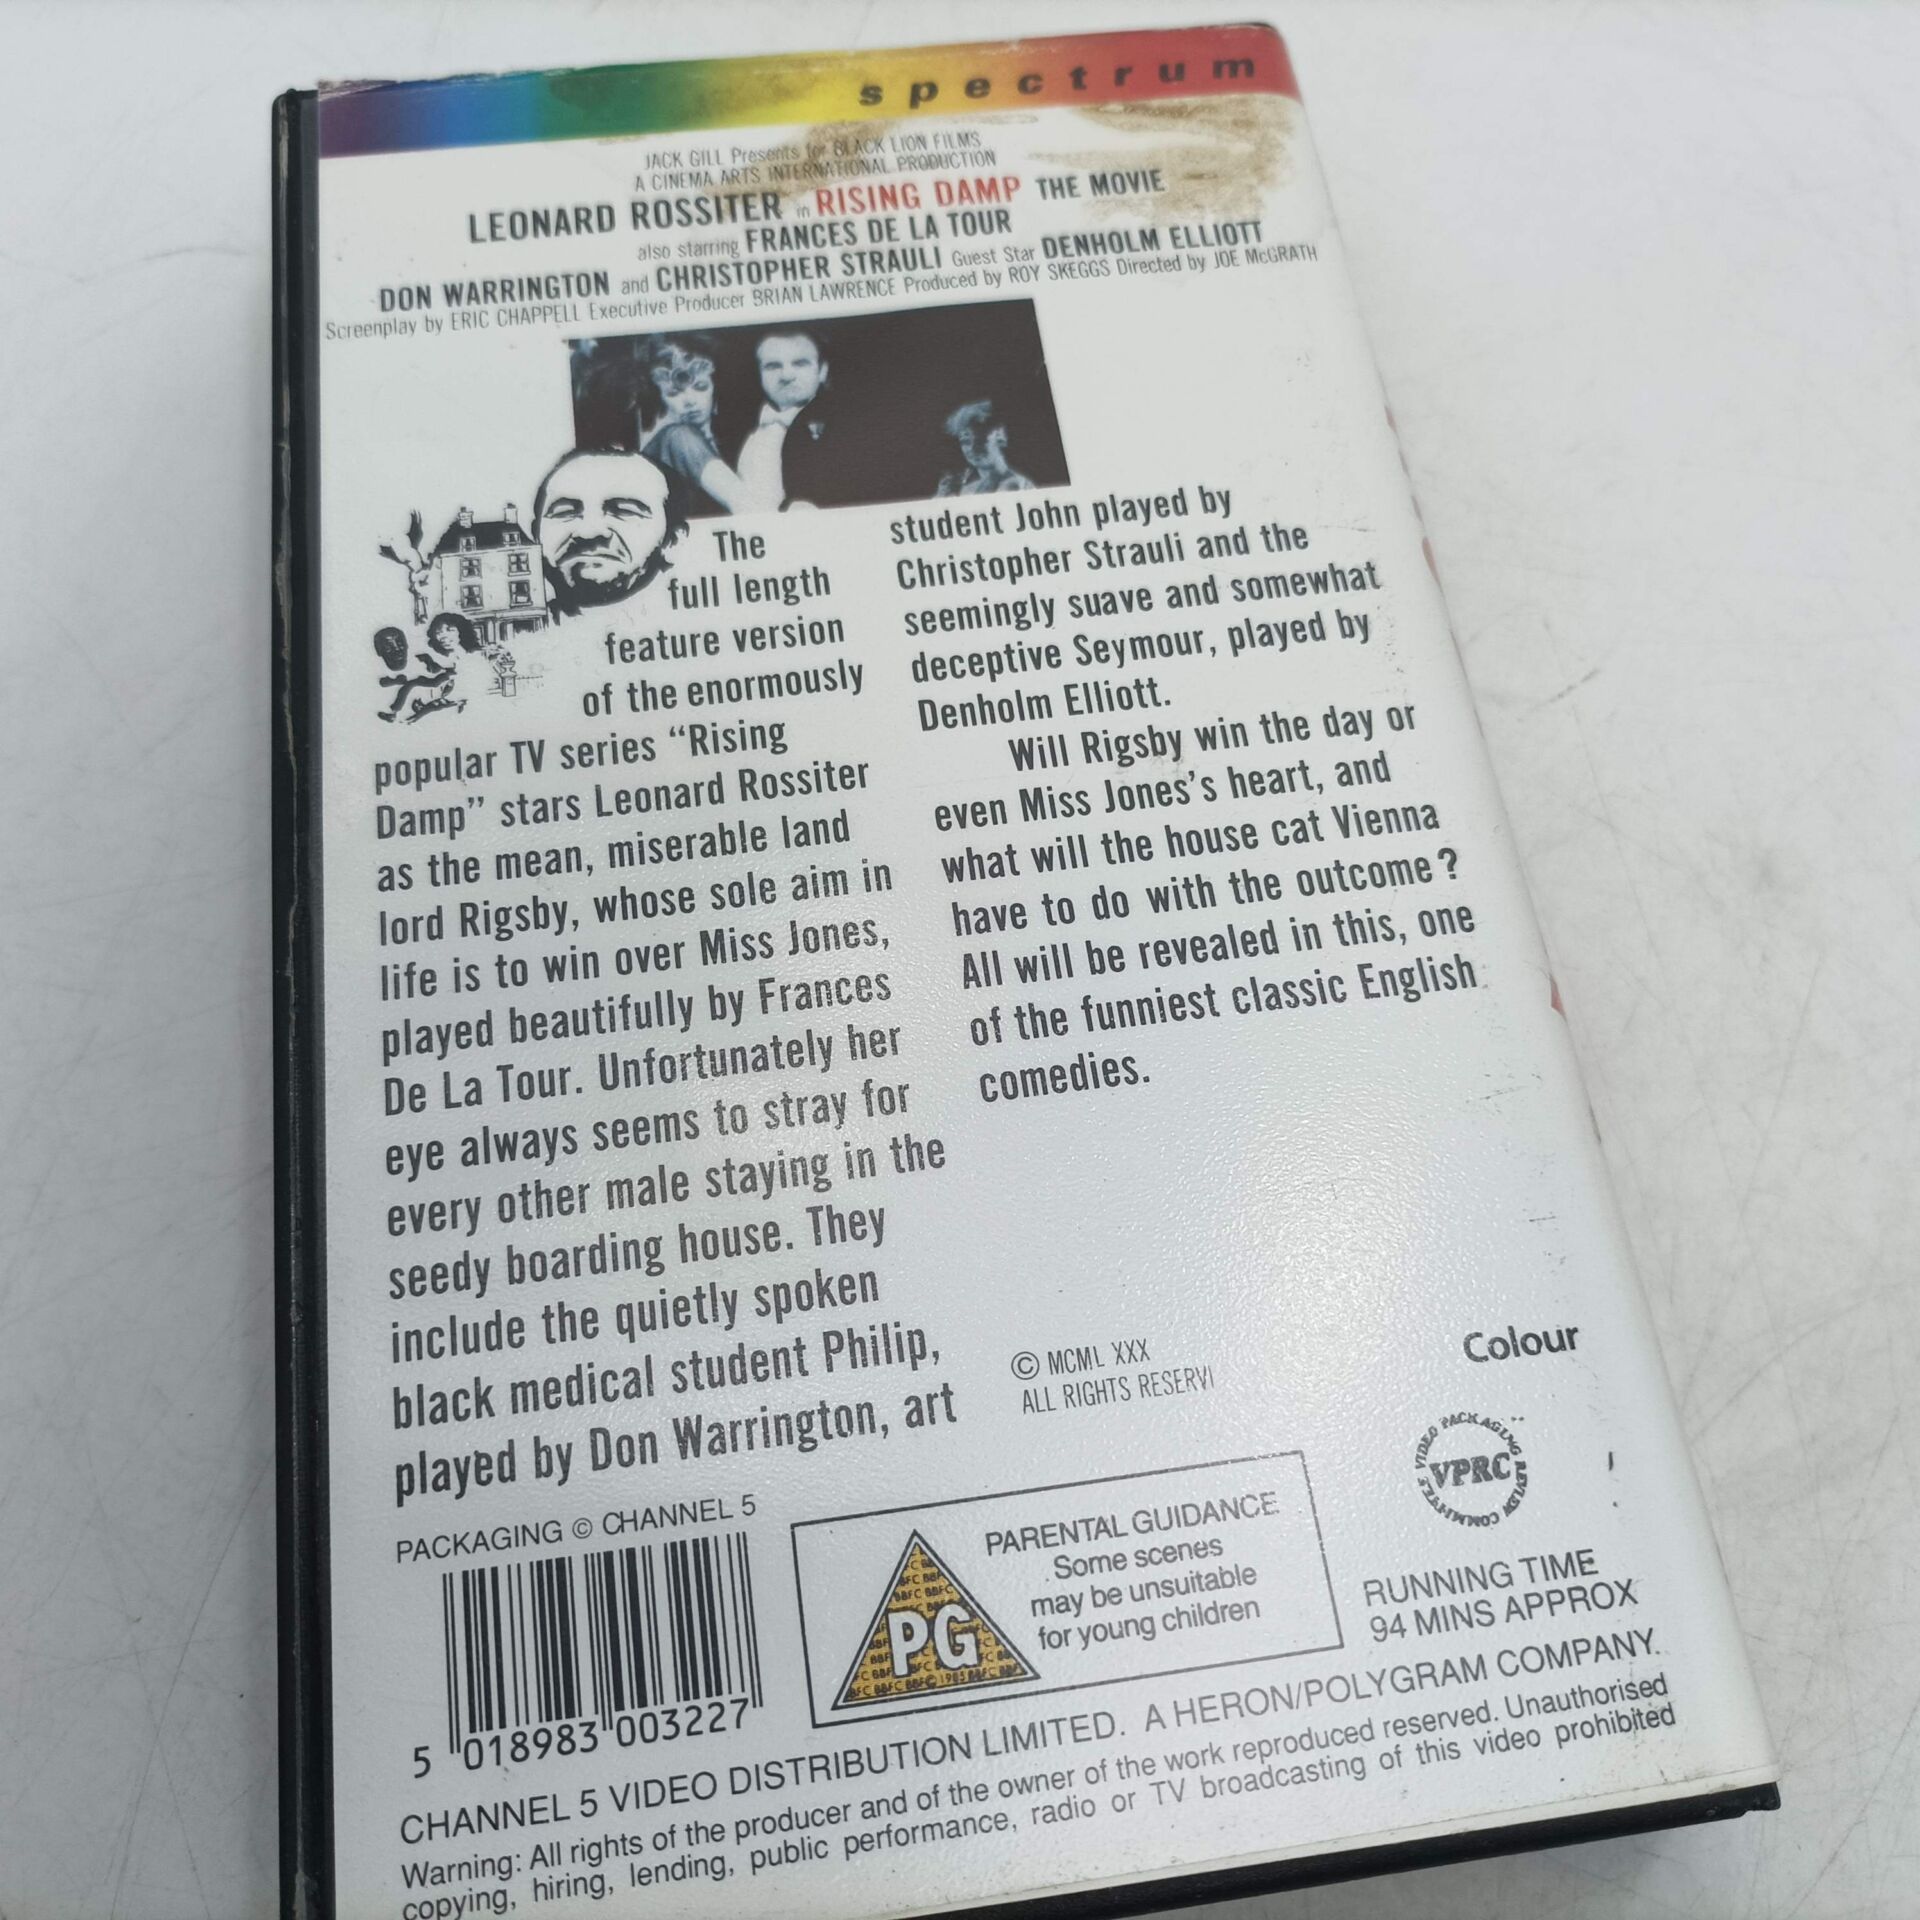 Rising Damp The Movie (1980) VHS Video [G+] Spectrum / Channel 5 [G]